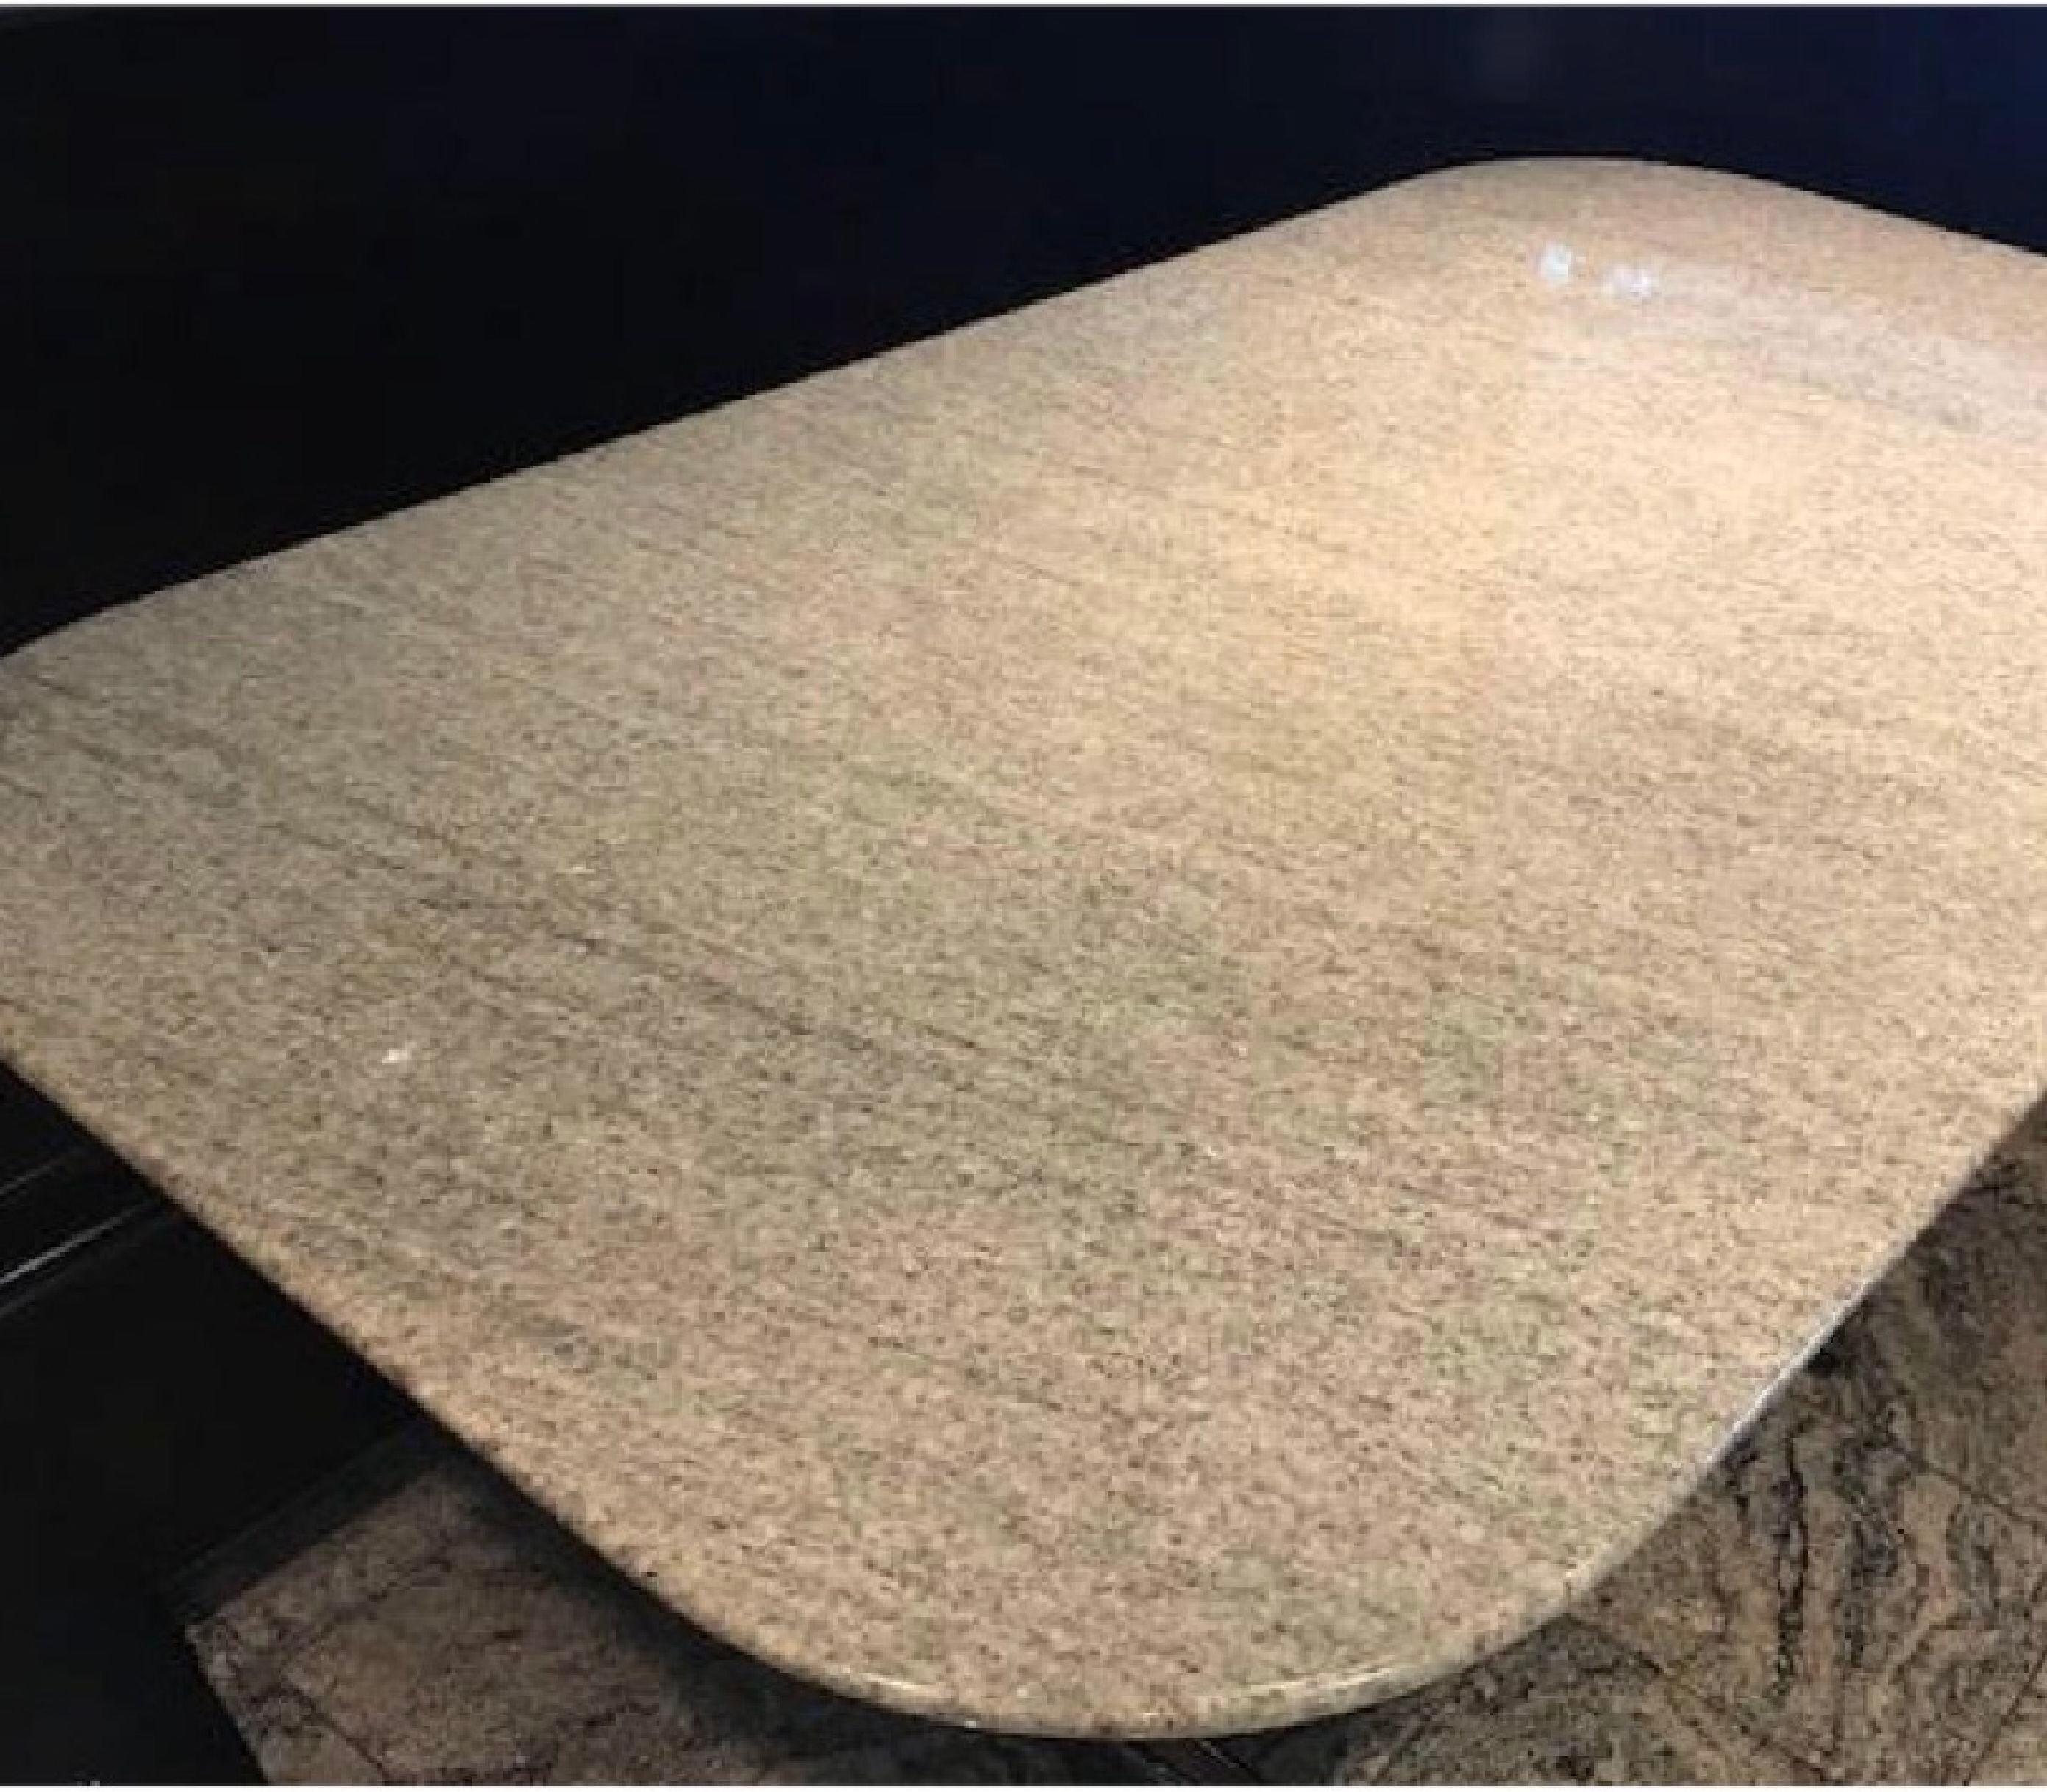 Gorgeous custom ordered table, with granite slab top from Dometec. Nearly Mint condition. From a Park Avenue estate. Don't miss this deal! Love the retro rounded corners and highly burnished surface.  Hihg quality stone has massive amount of mica